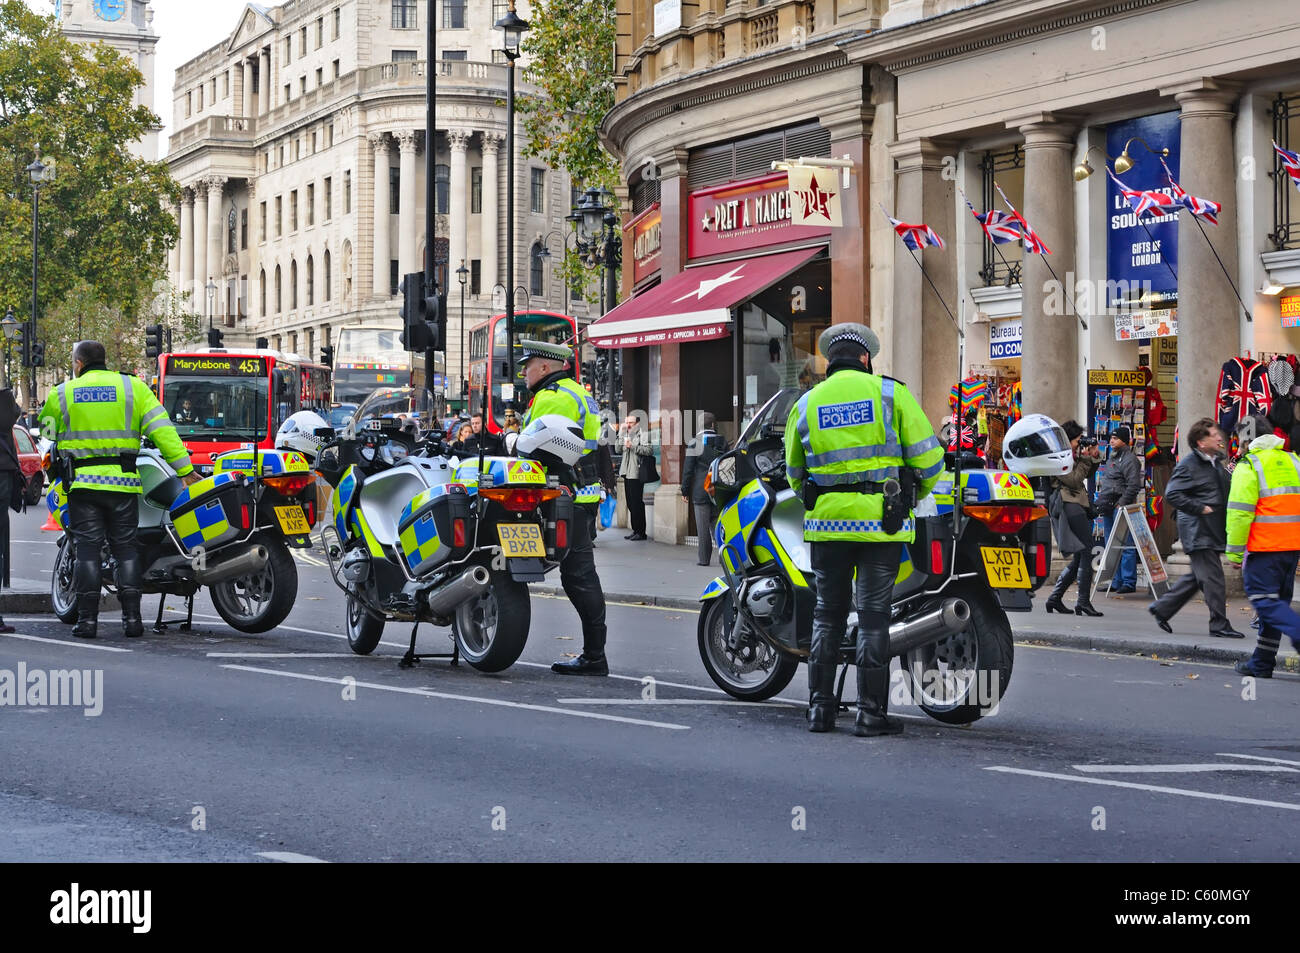 London policemans on motorcycles, law and order control. Not far from Trafalgar Square, Whitehall on the street. London UK Stock Photo